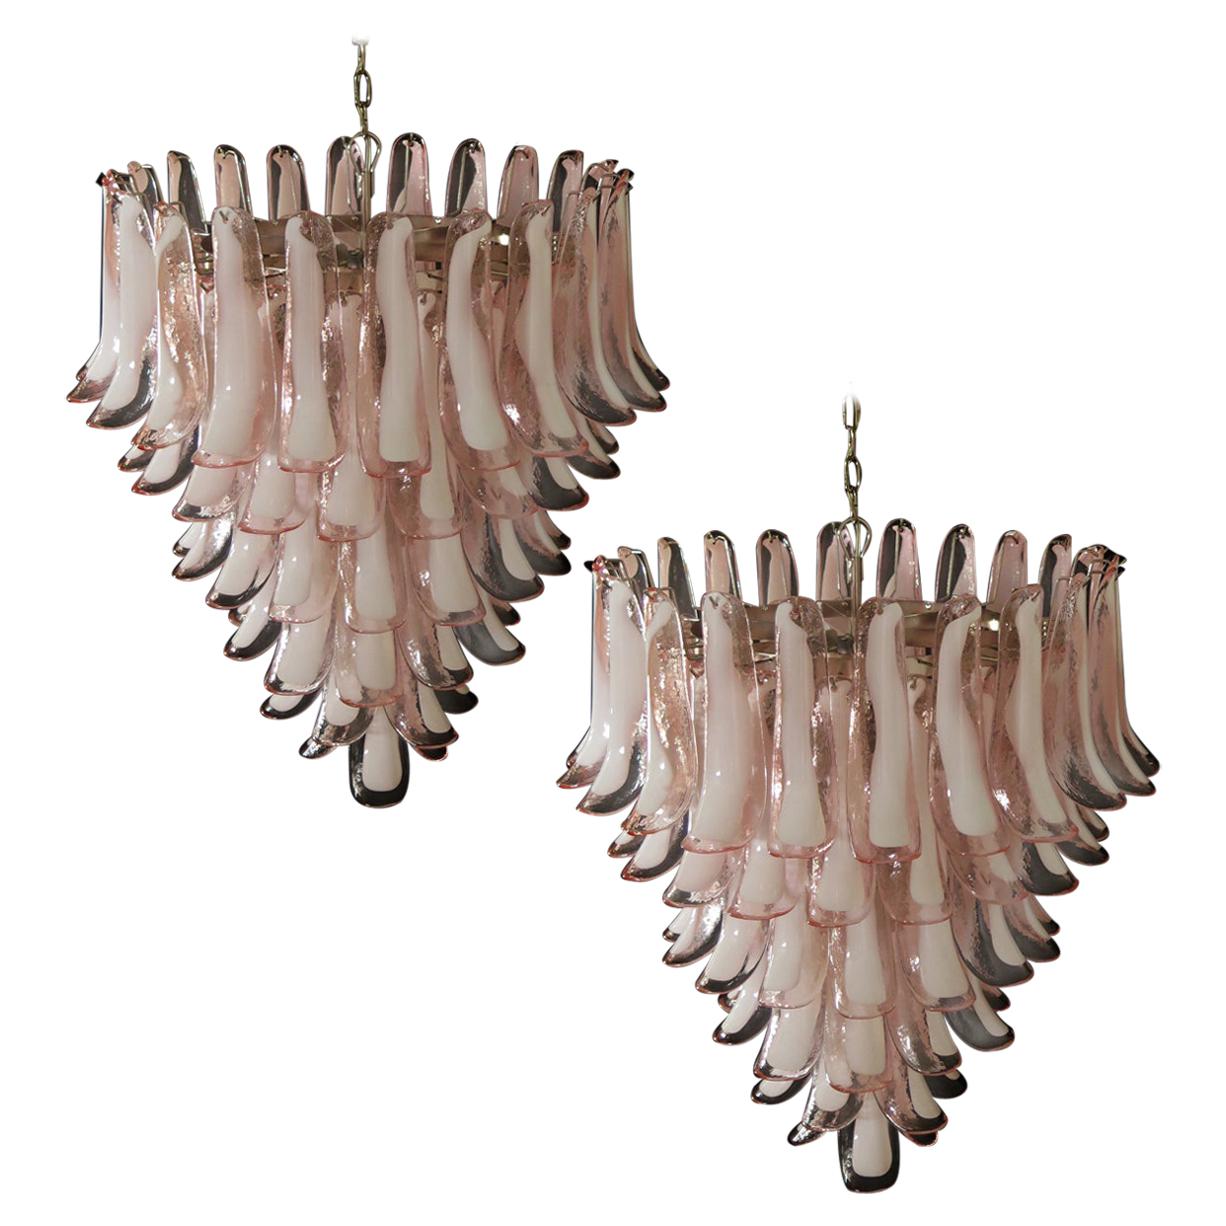 Pair of Huge Italian vintage Murano chandeliers made by 75 glass petals (pink and white “lattimo”) in a chrome frame.
Period: late 20th century
Dimensions: 65 inches (165 cm) height with chain; 37.40 inches (95 cm) height without chain; 31.50